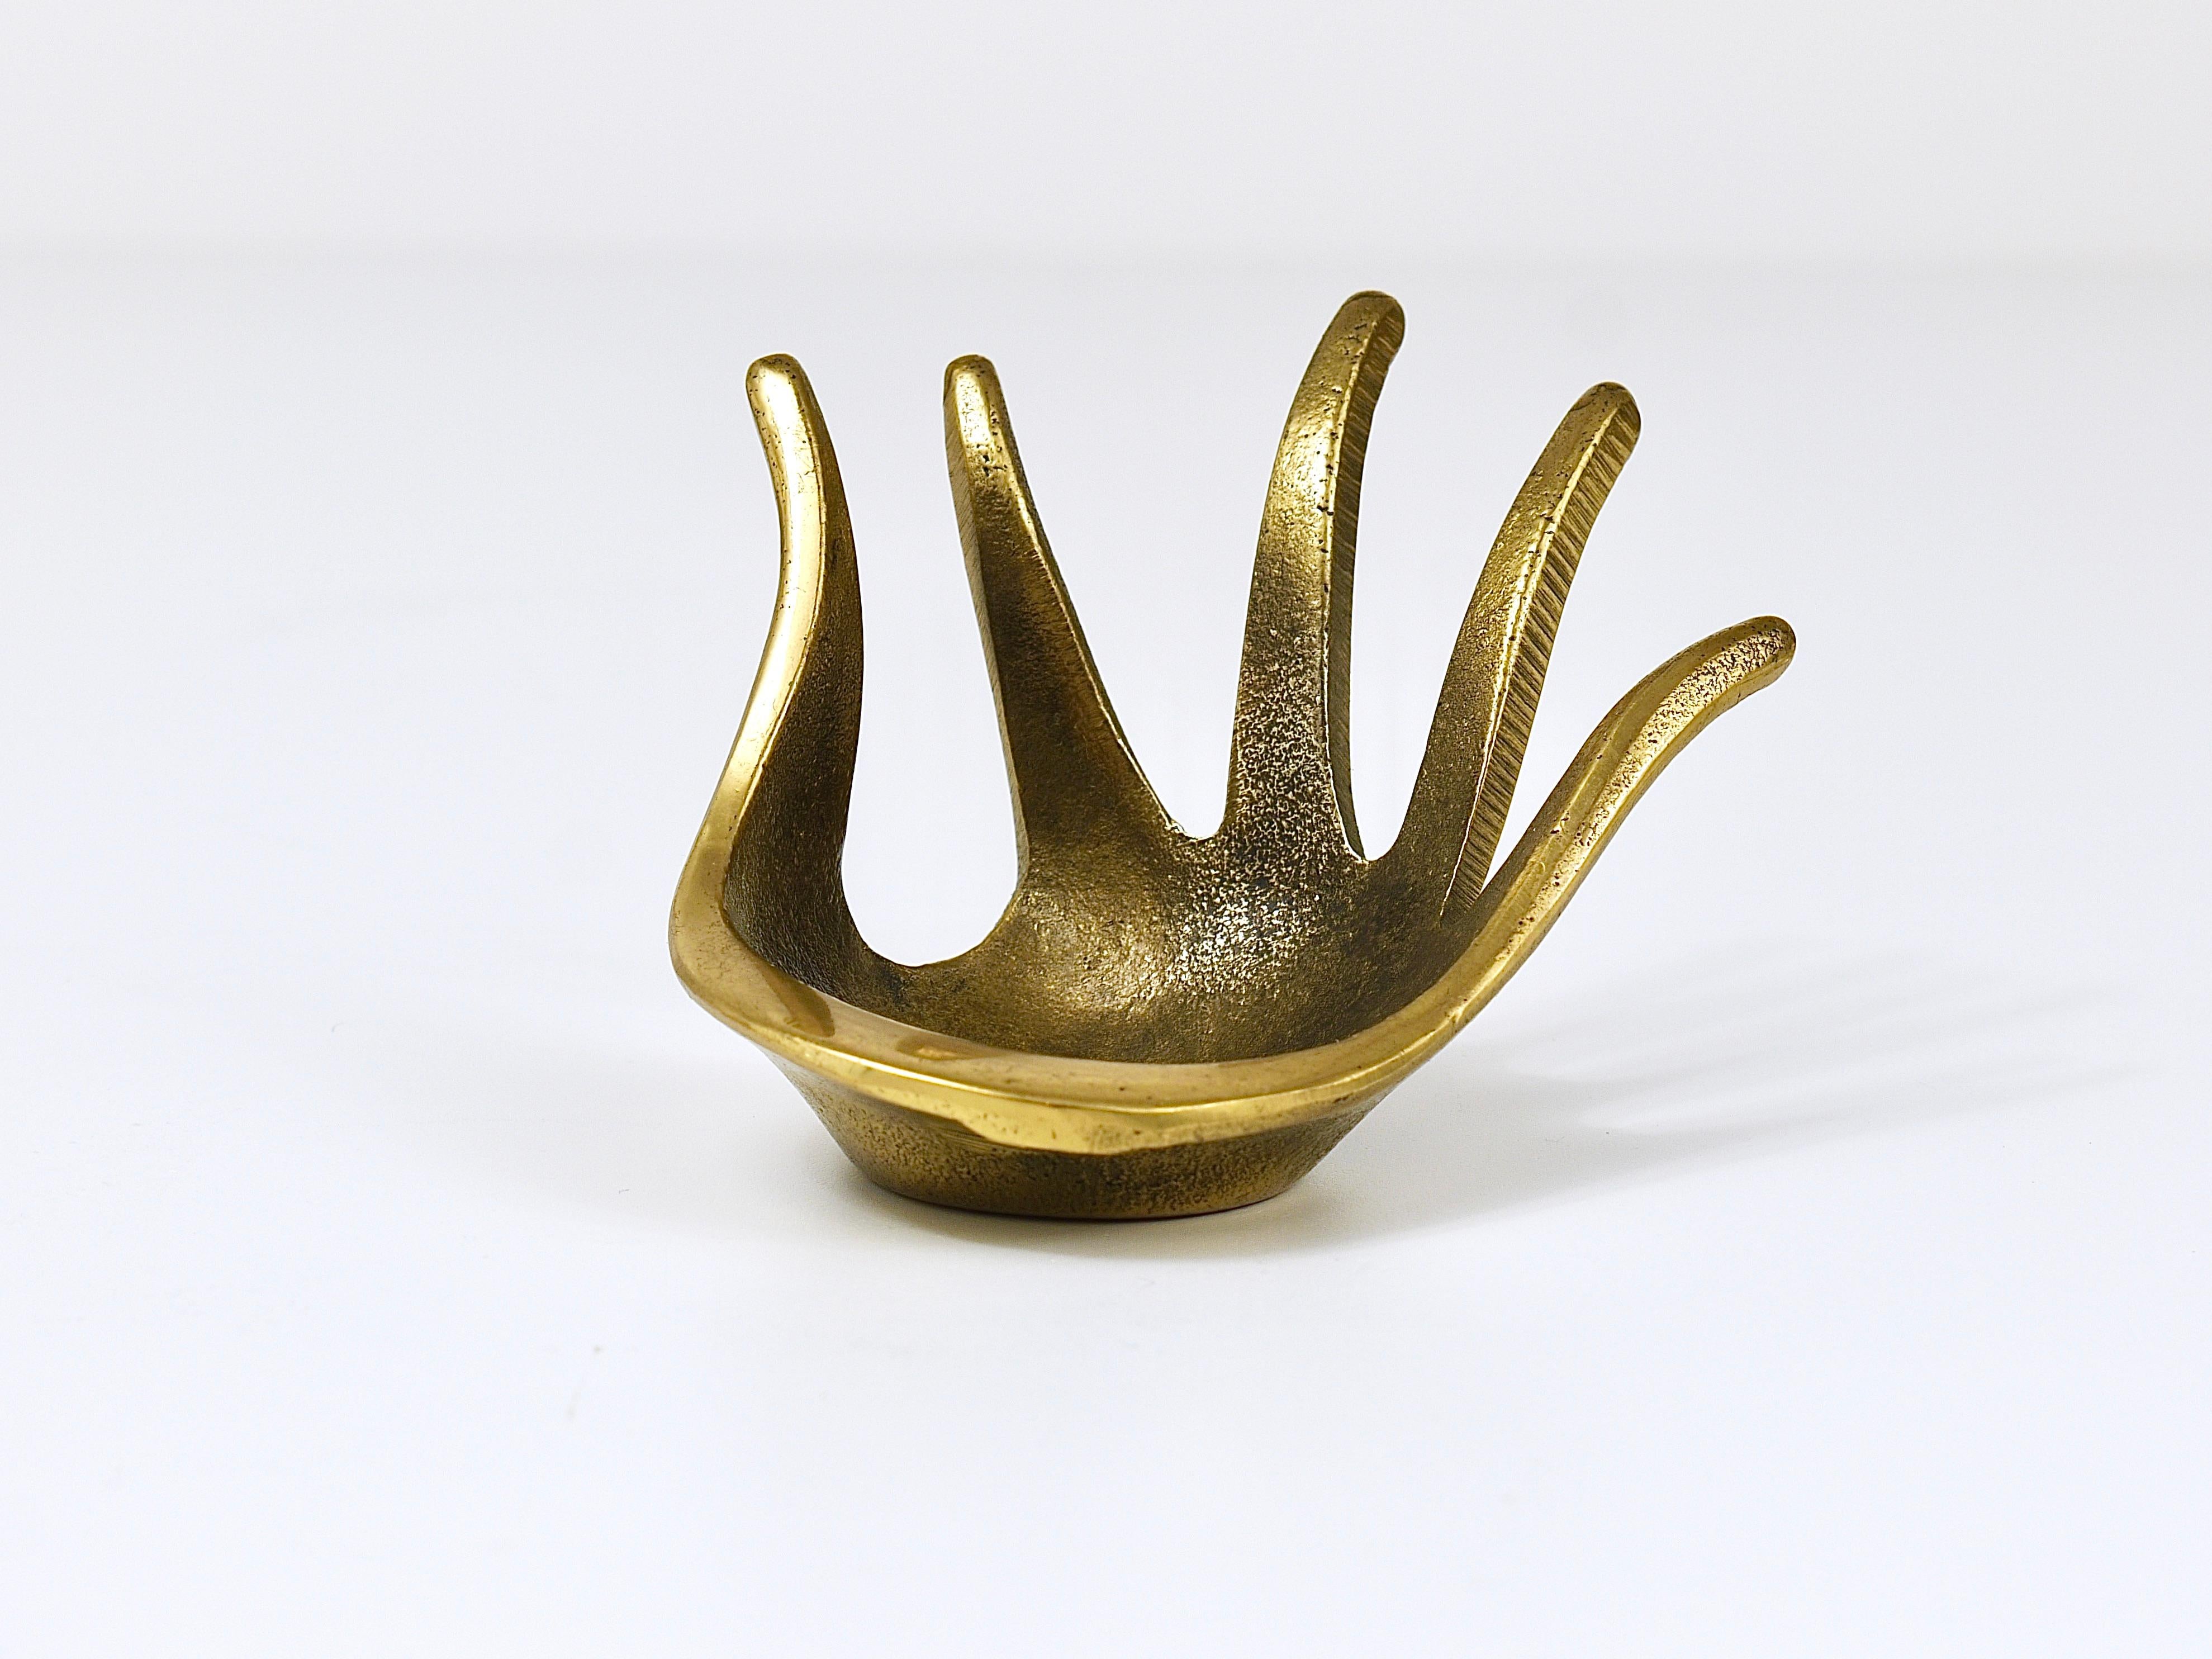 A beautiful sculptural modernist brass bowl in the shape of a hand. Originally designed as an ashtray this elegant brass object is also suitable as a jewelry bowl, a ring holder or as a a „vide-poche“. A humorous design by Walter Bosse, executed by